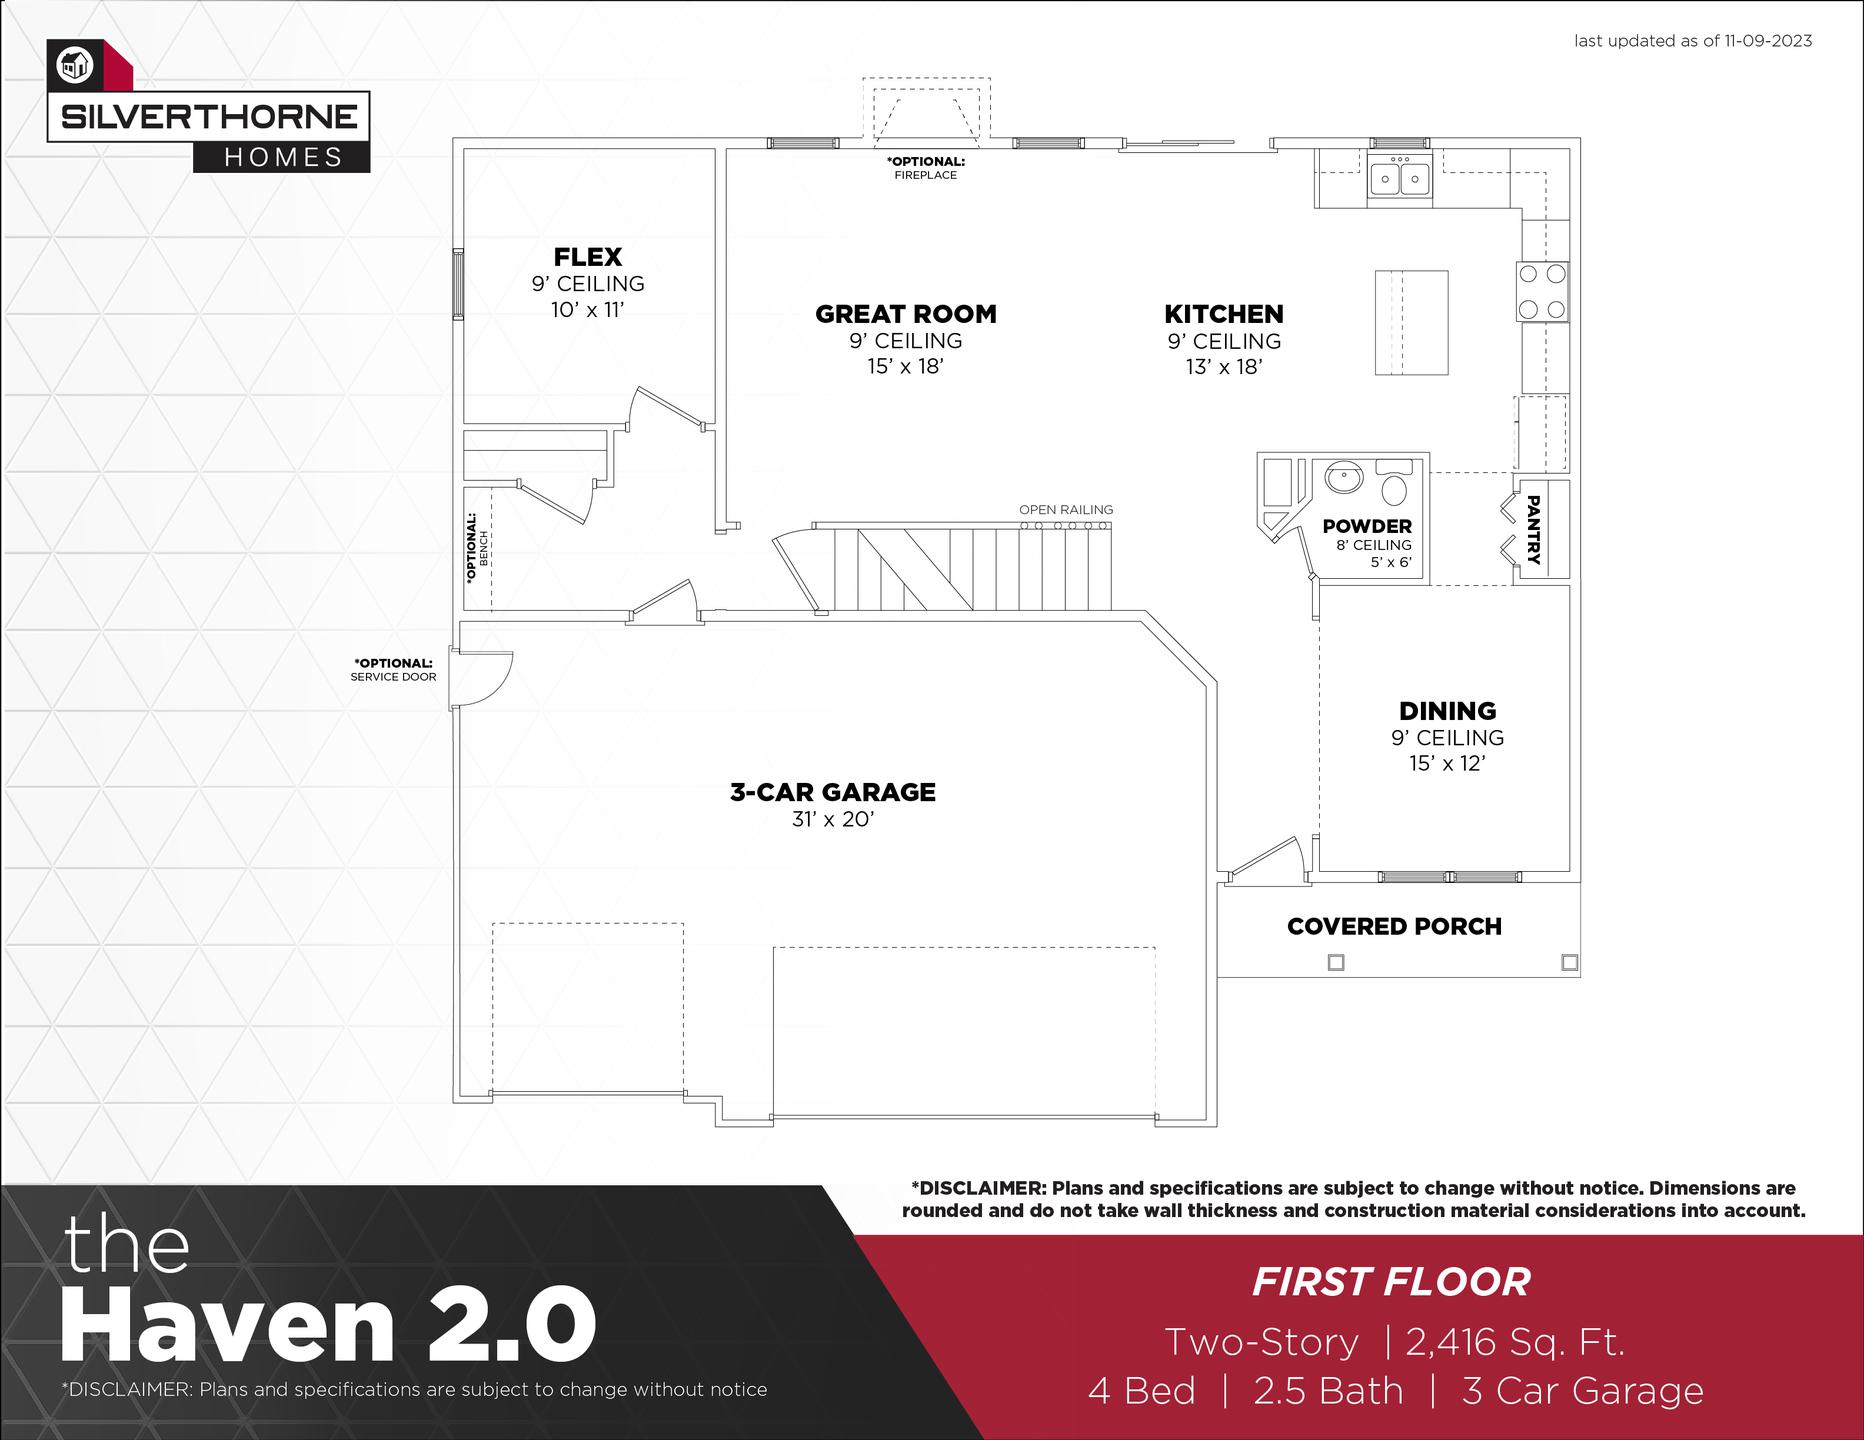 The Haven 2.0 Home with 4 Bedrooms